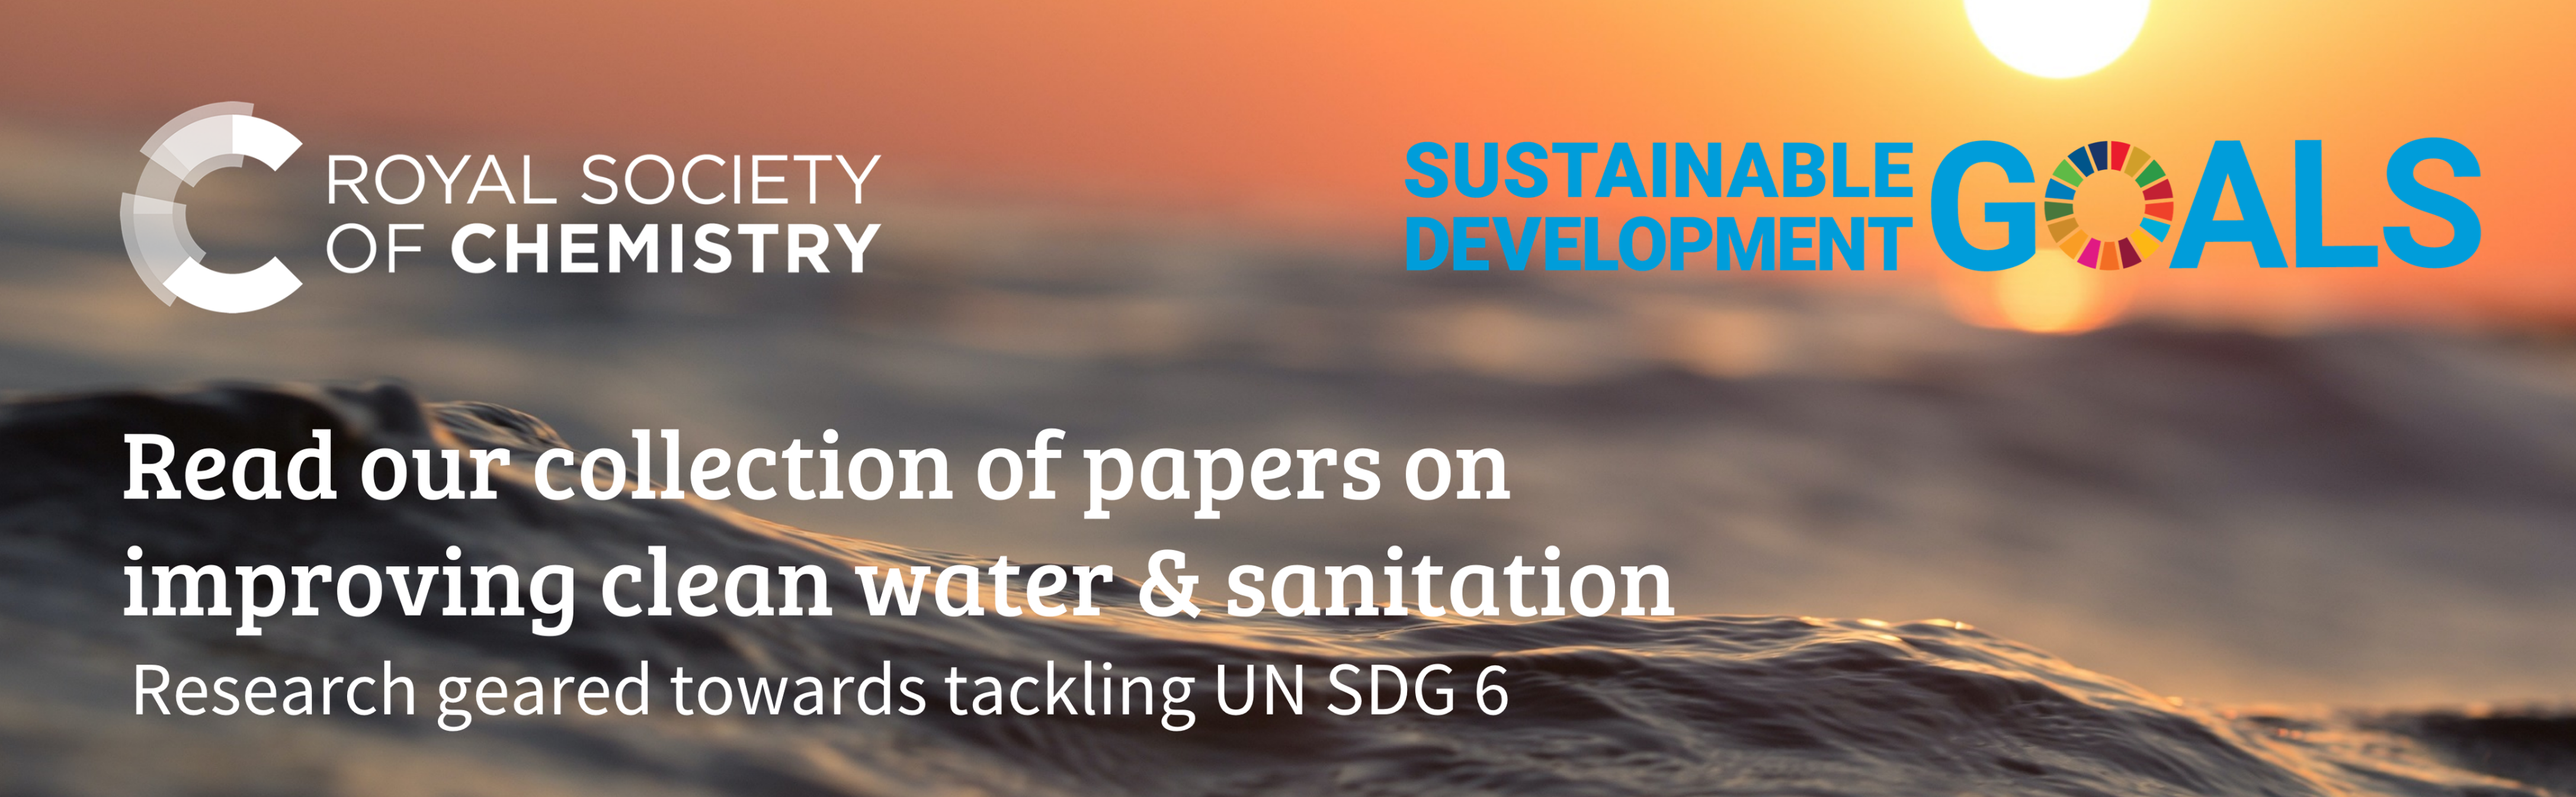 Read our collection of papers on clean water & sanitation. 